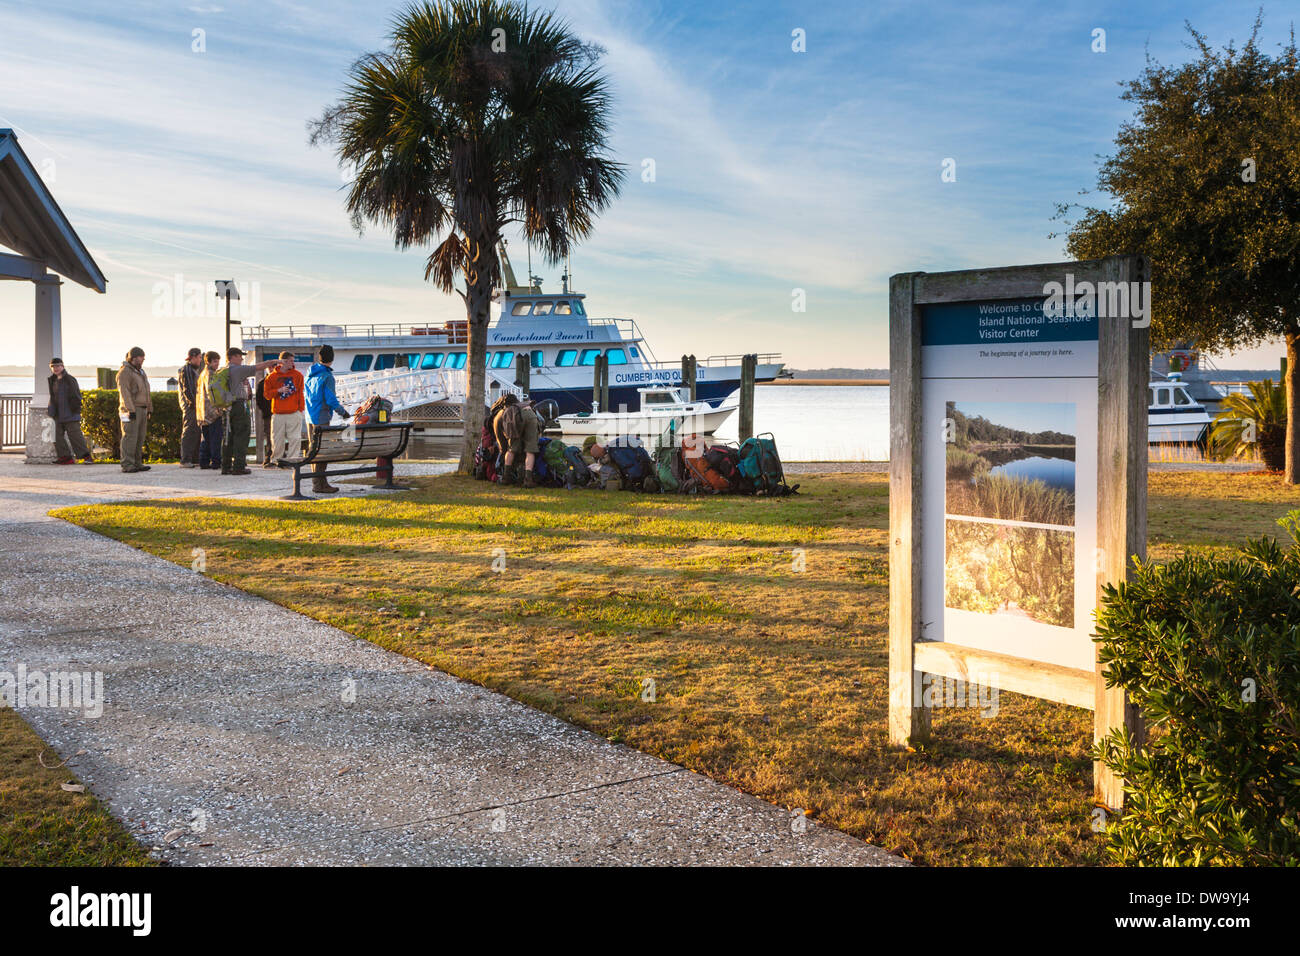 Group of campers waiting to board the Cumberland Queen II ferry boat to Cumberland Island National Seashore in St. Marys, GA Stock Photo